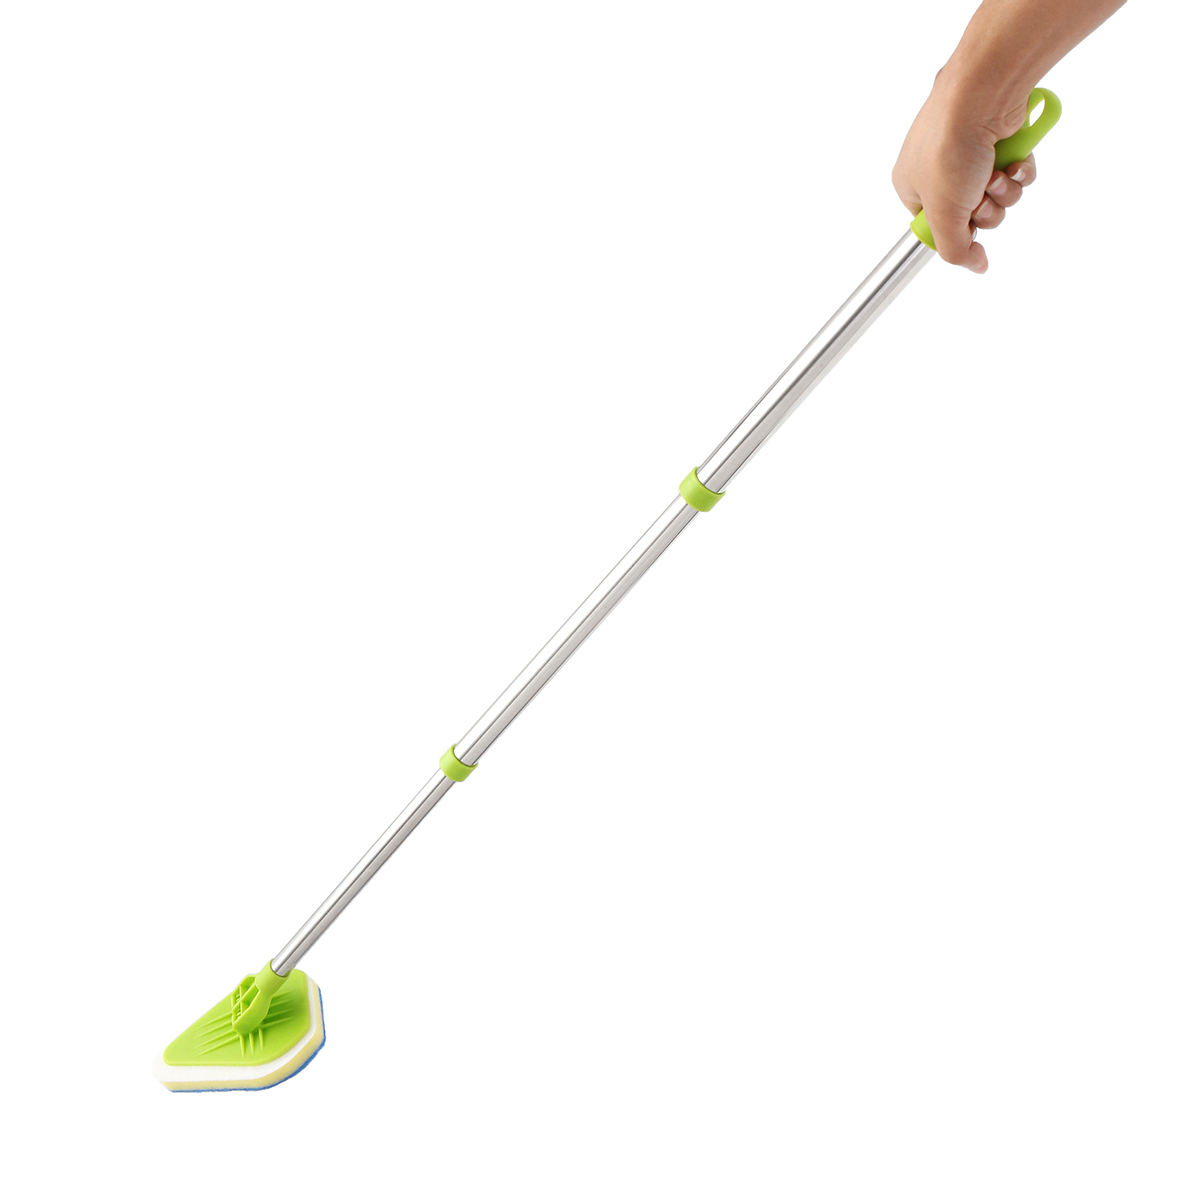 Length-and-Angel-Adjustable-Kitchen-Cleaning-Brushes-Quick-Installation-Multi-brush-Scrubber-Cleaner-1369842-8